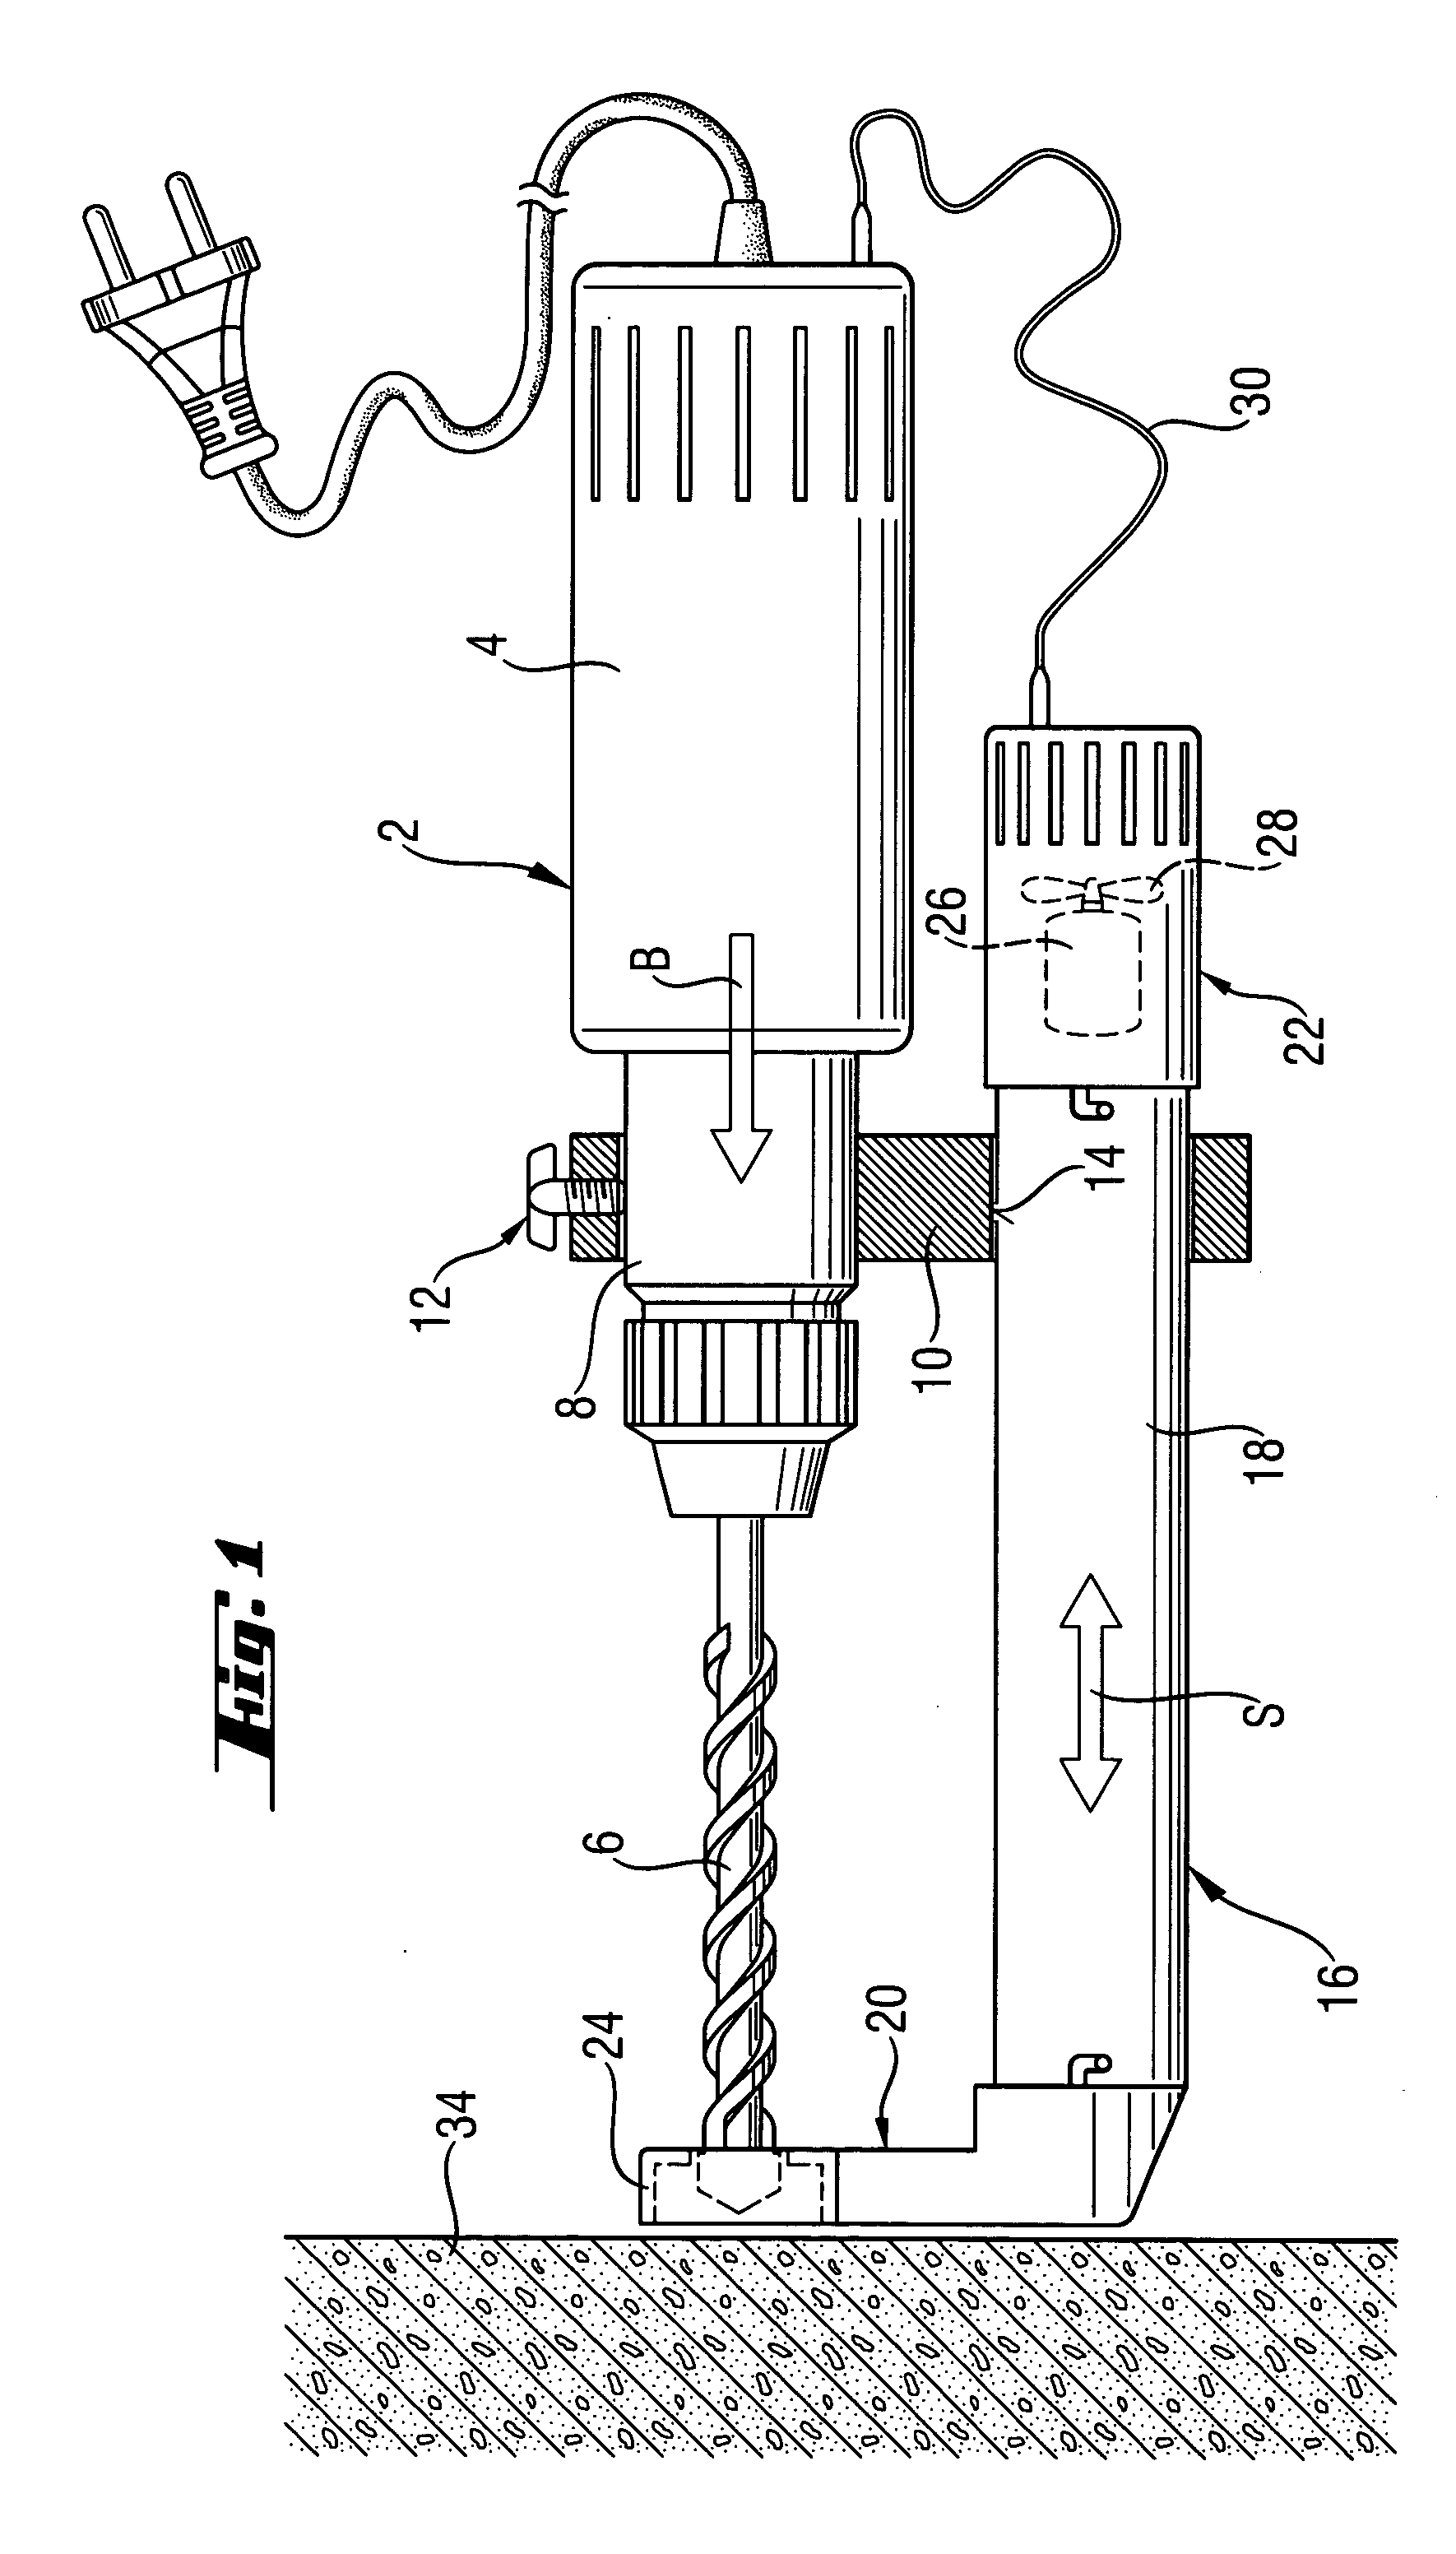 Suction device